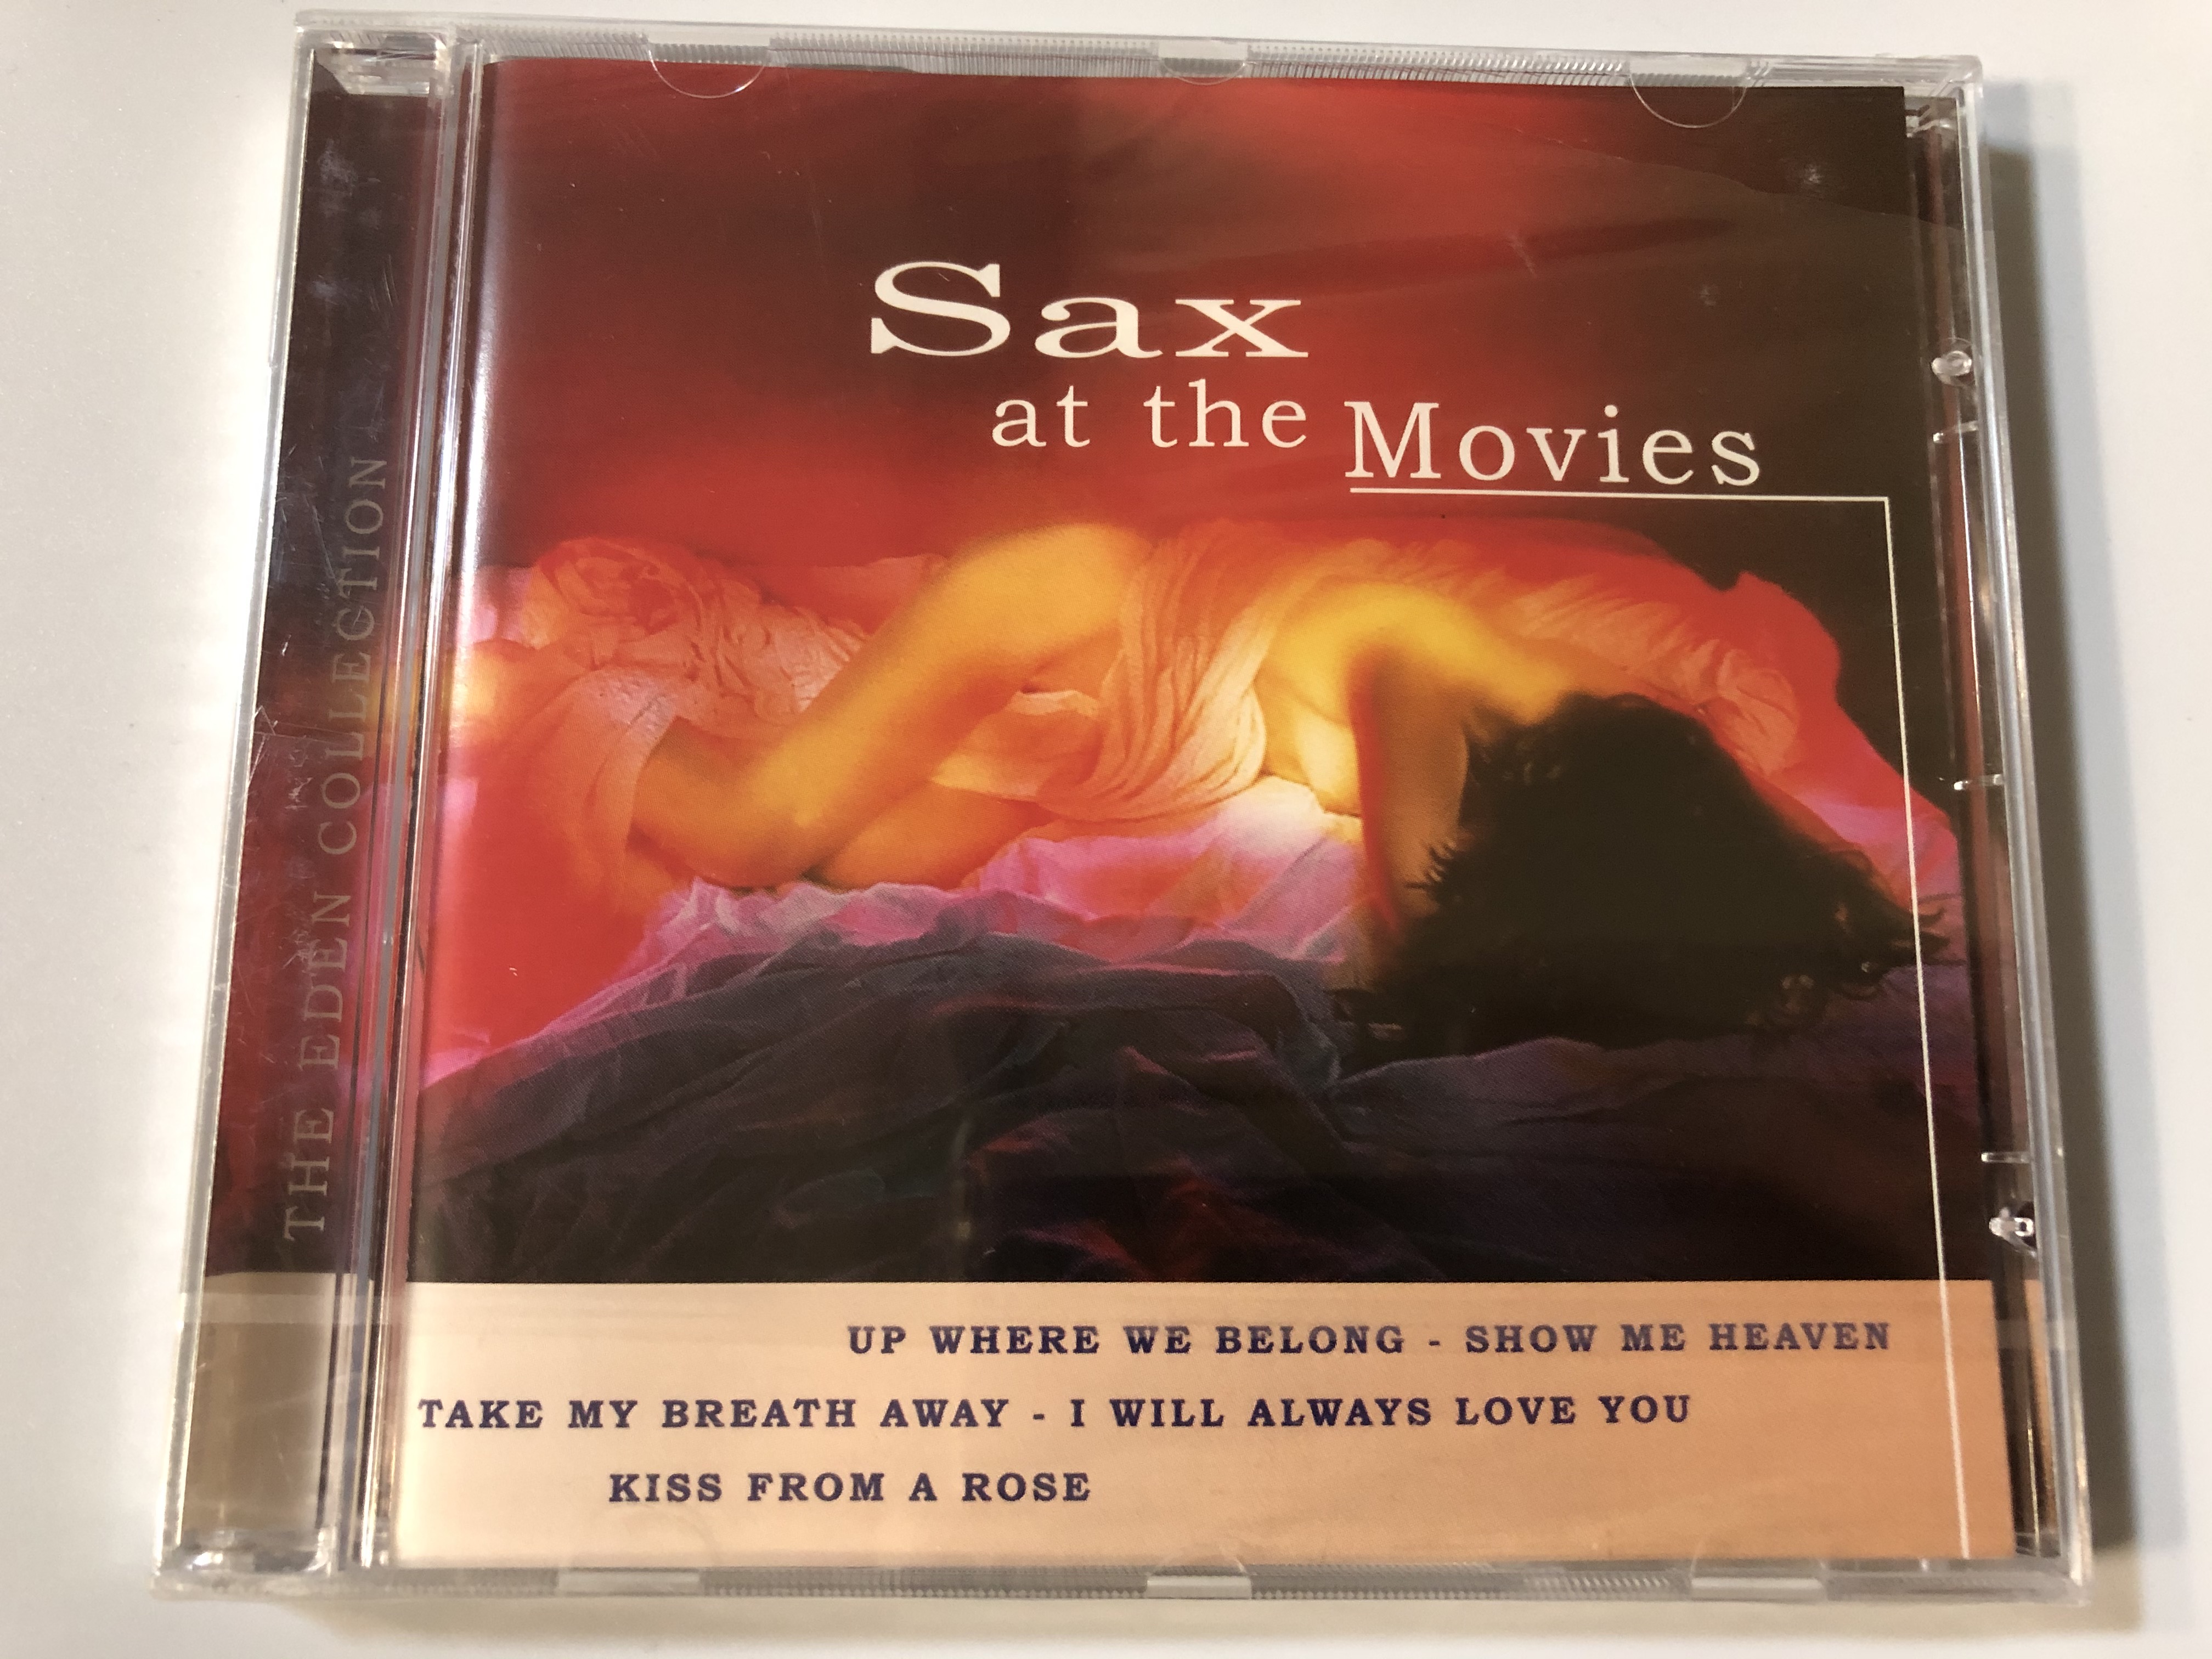 sax-at-the-movies-up-where-we-belong-show-me-heaven-take-my-breath-away-i-will-always-love-you-kiss-from-a-rose-disky-audio-cd-1999-ins-855282-1-.jpg